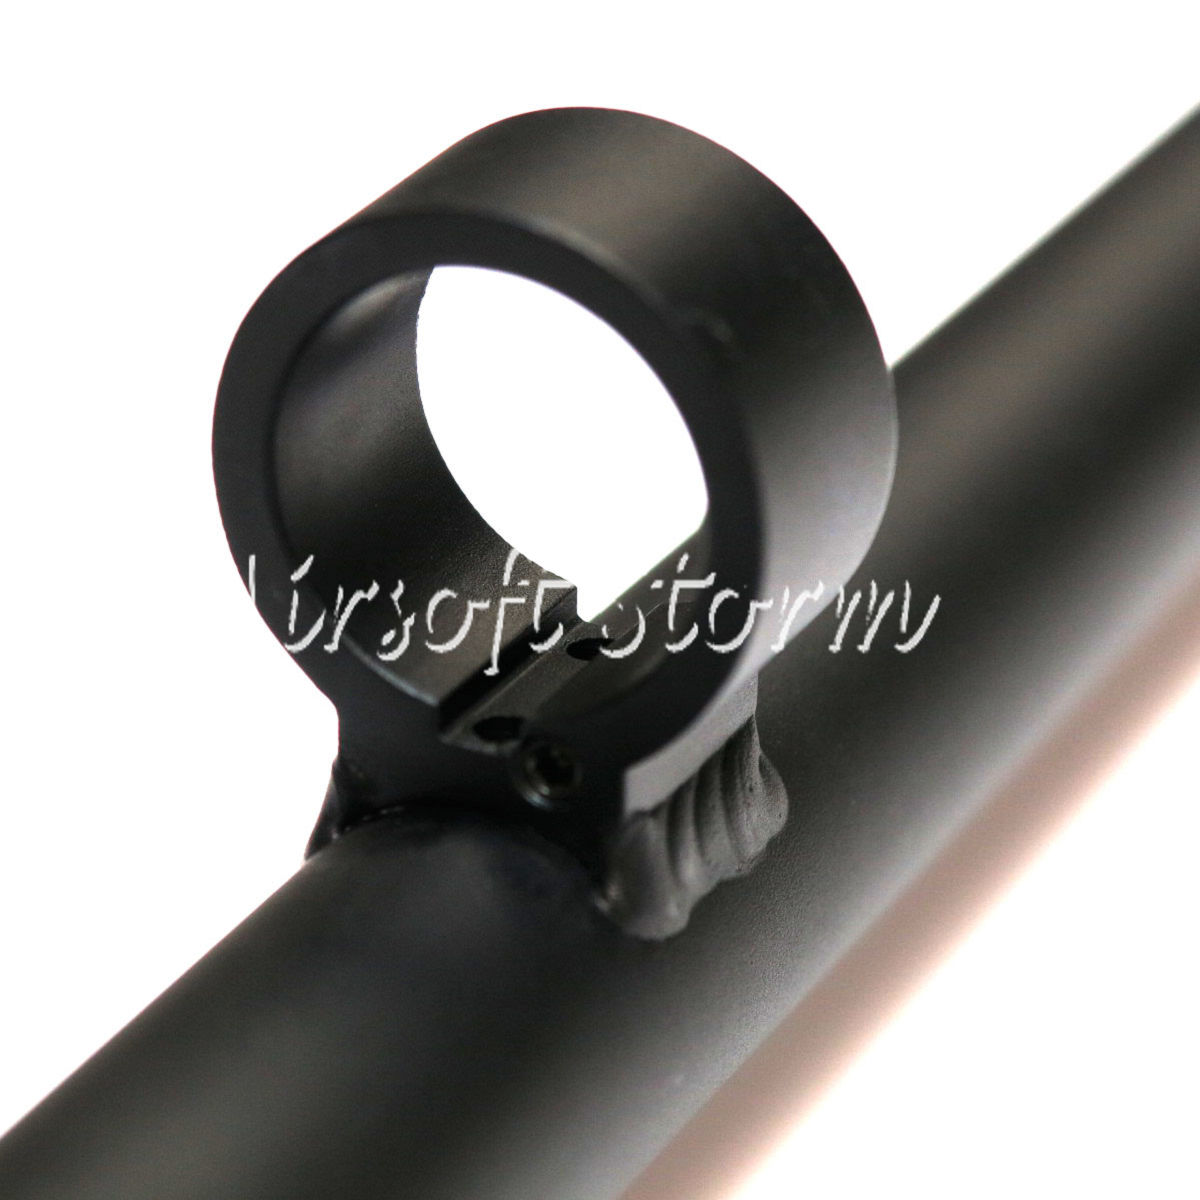 Shooting Gear APS 24" Outer Barrel With Ball Sight For CAM 870 Shotgun